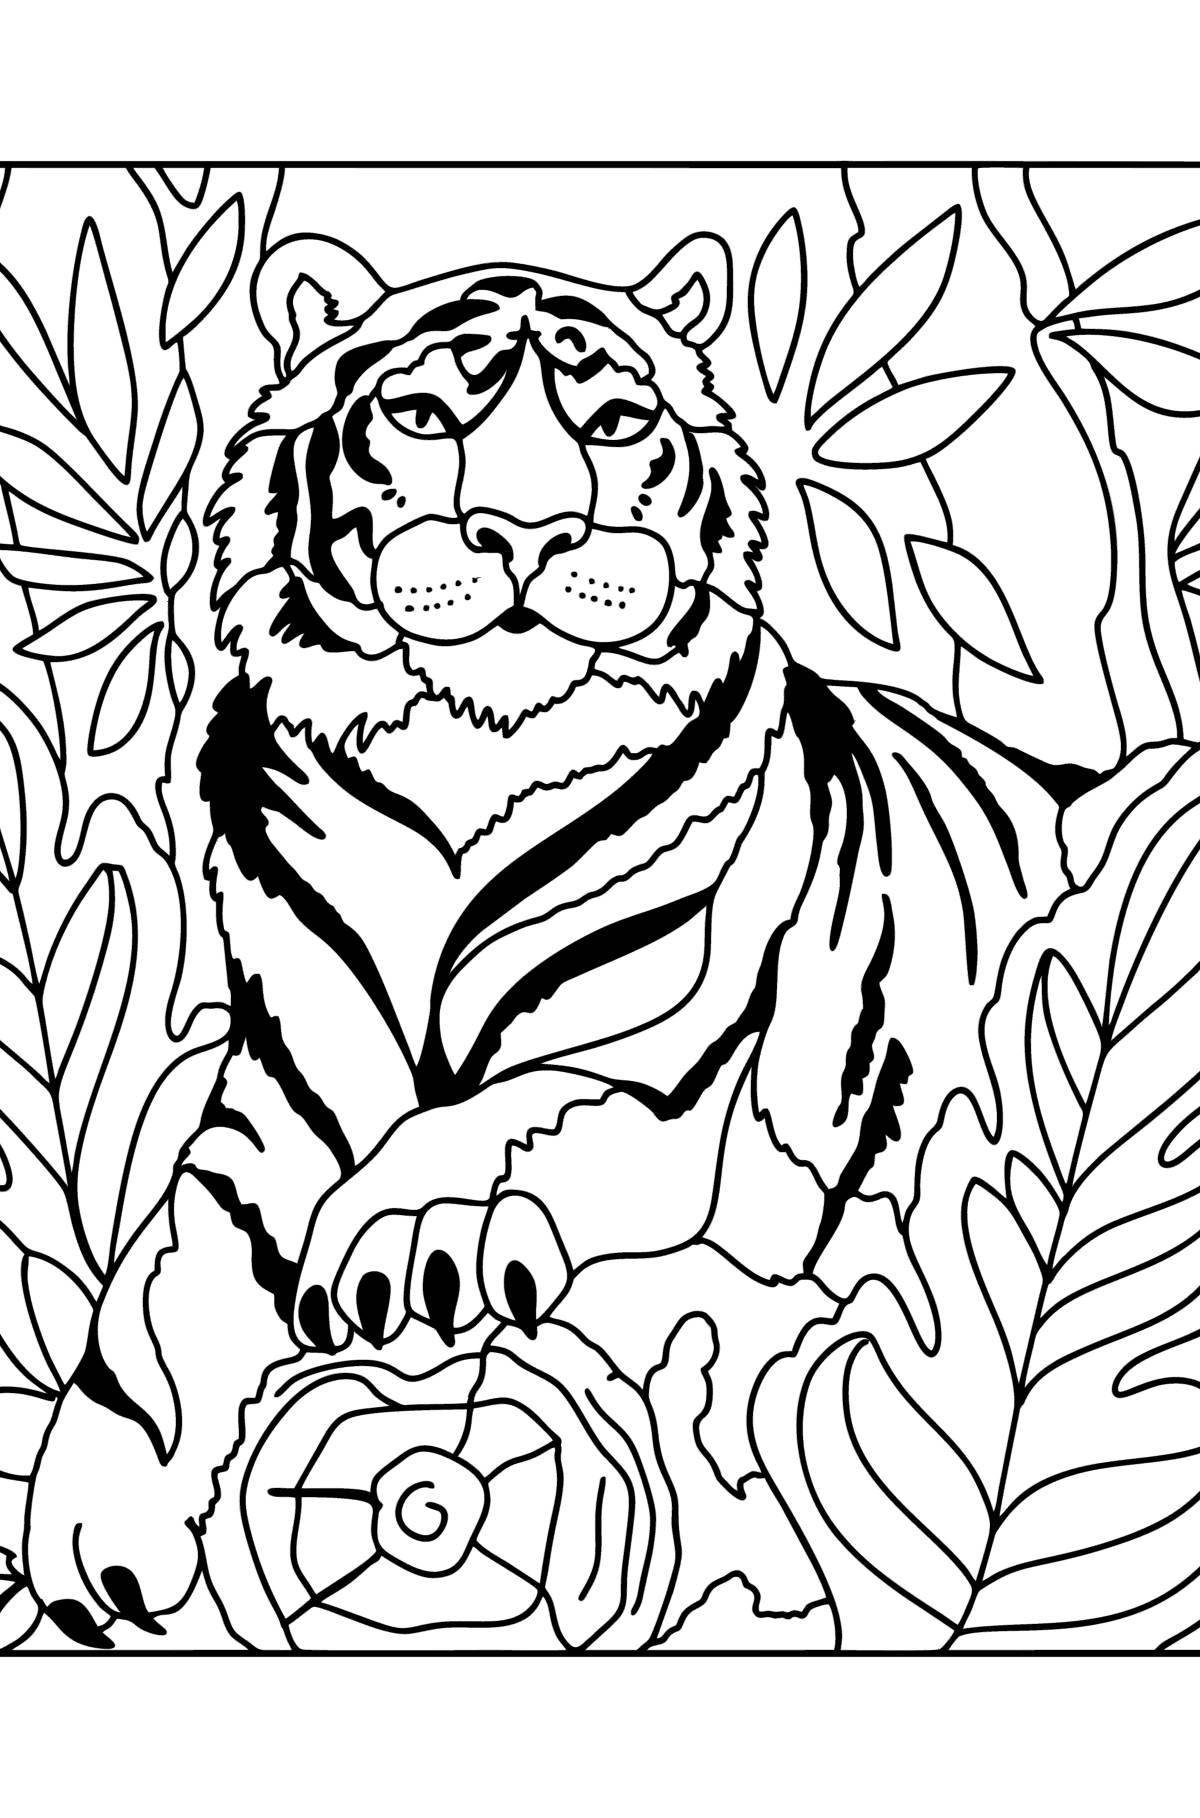 Playful tiger coloring book for children 6-7 years old